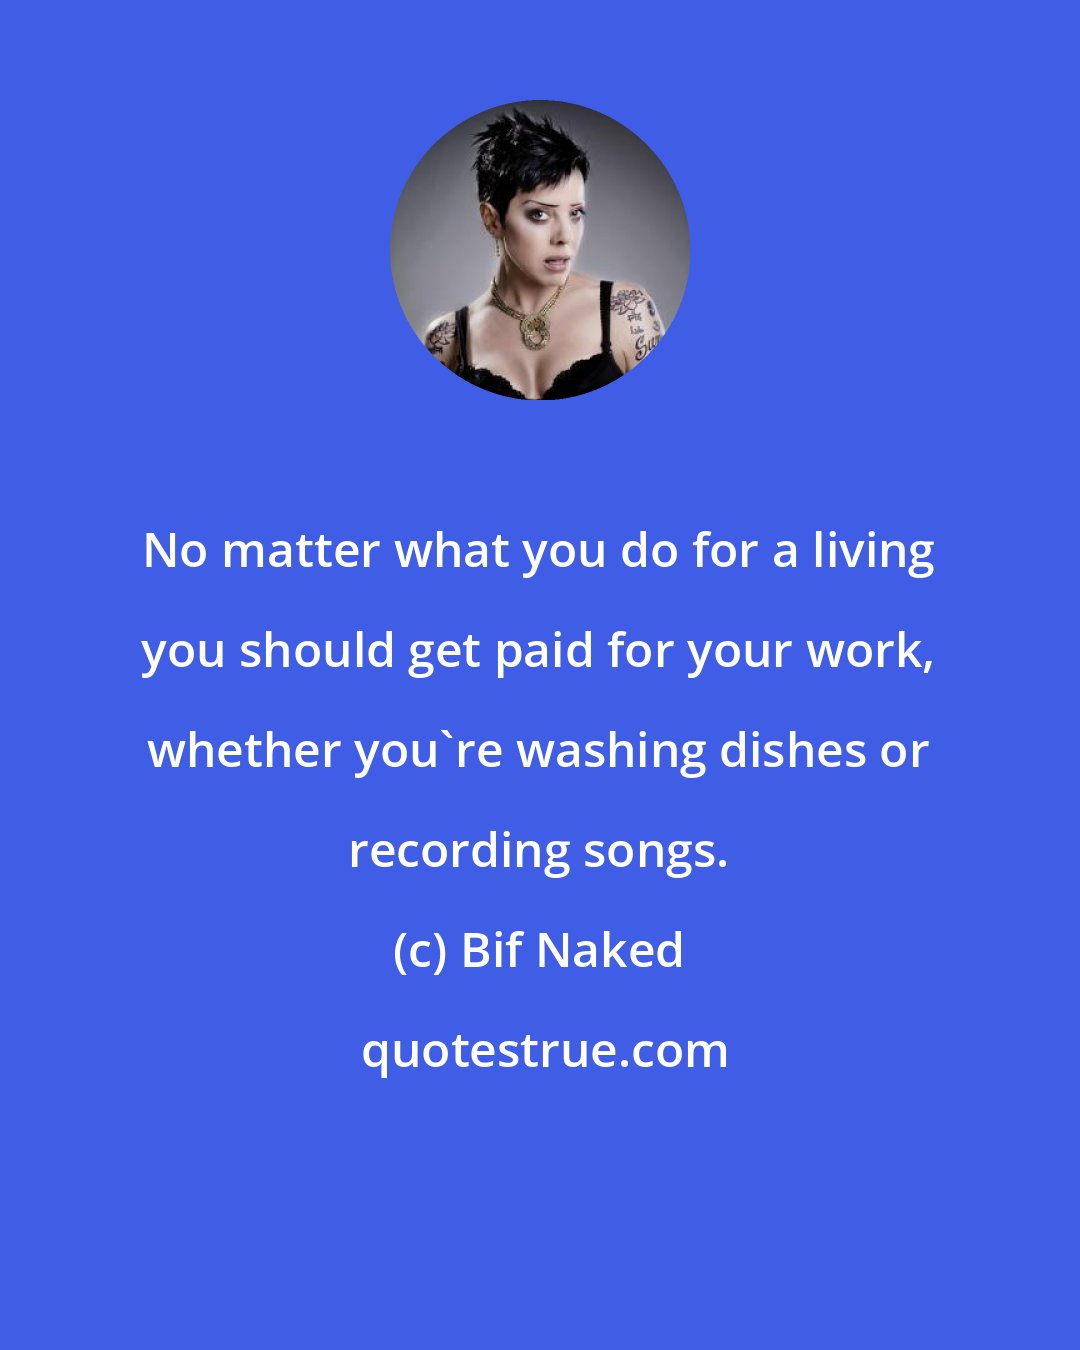 Bif Naked: No matter what you do for a living you should get paid for your work, whether you're washing dishes or recording songs.